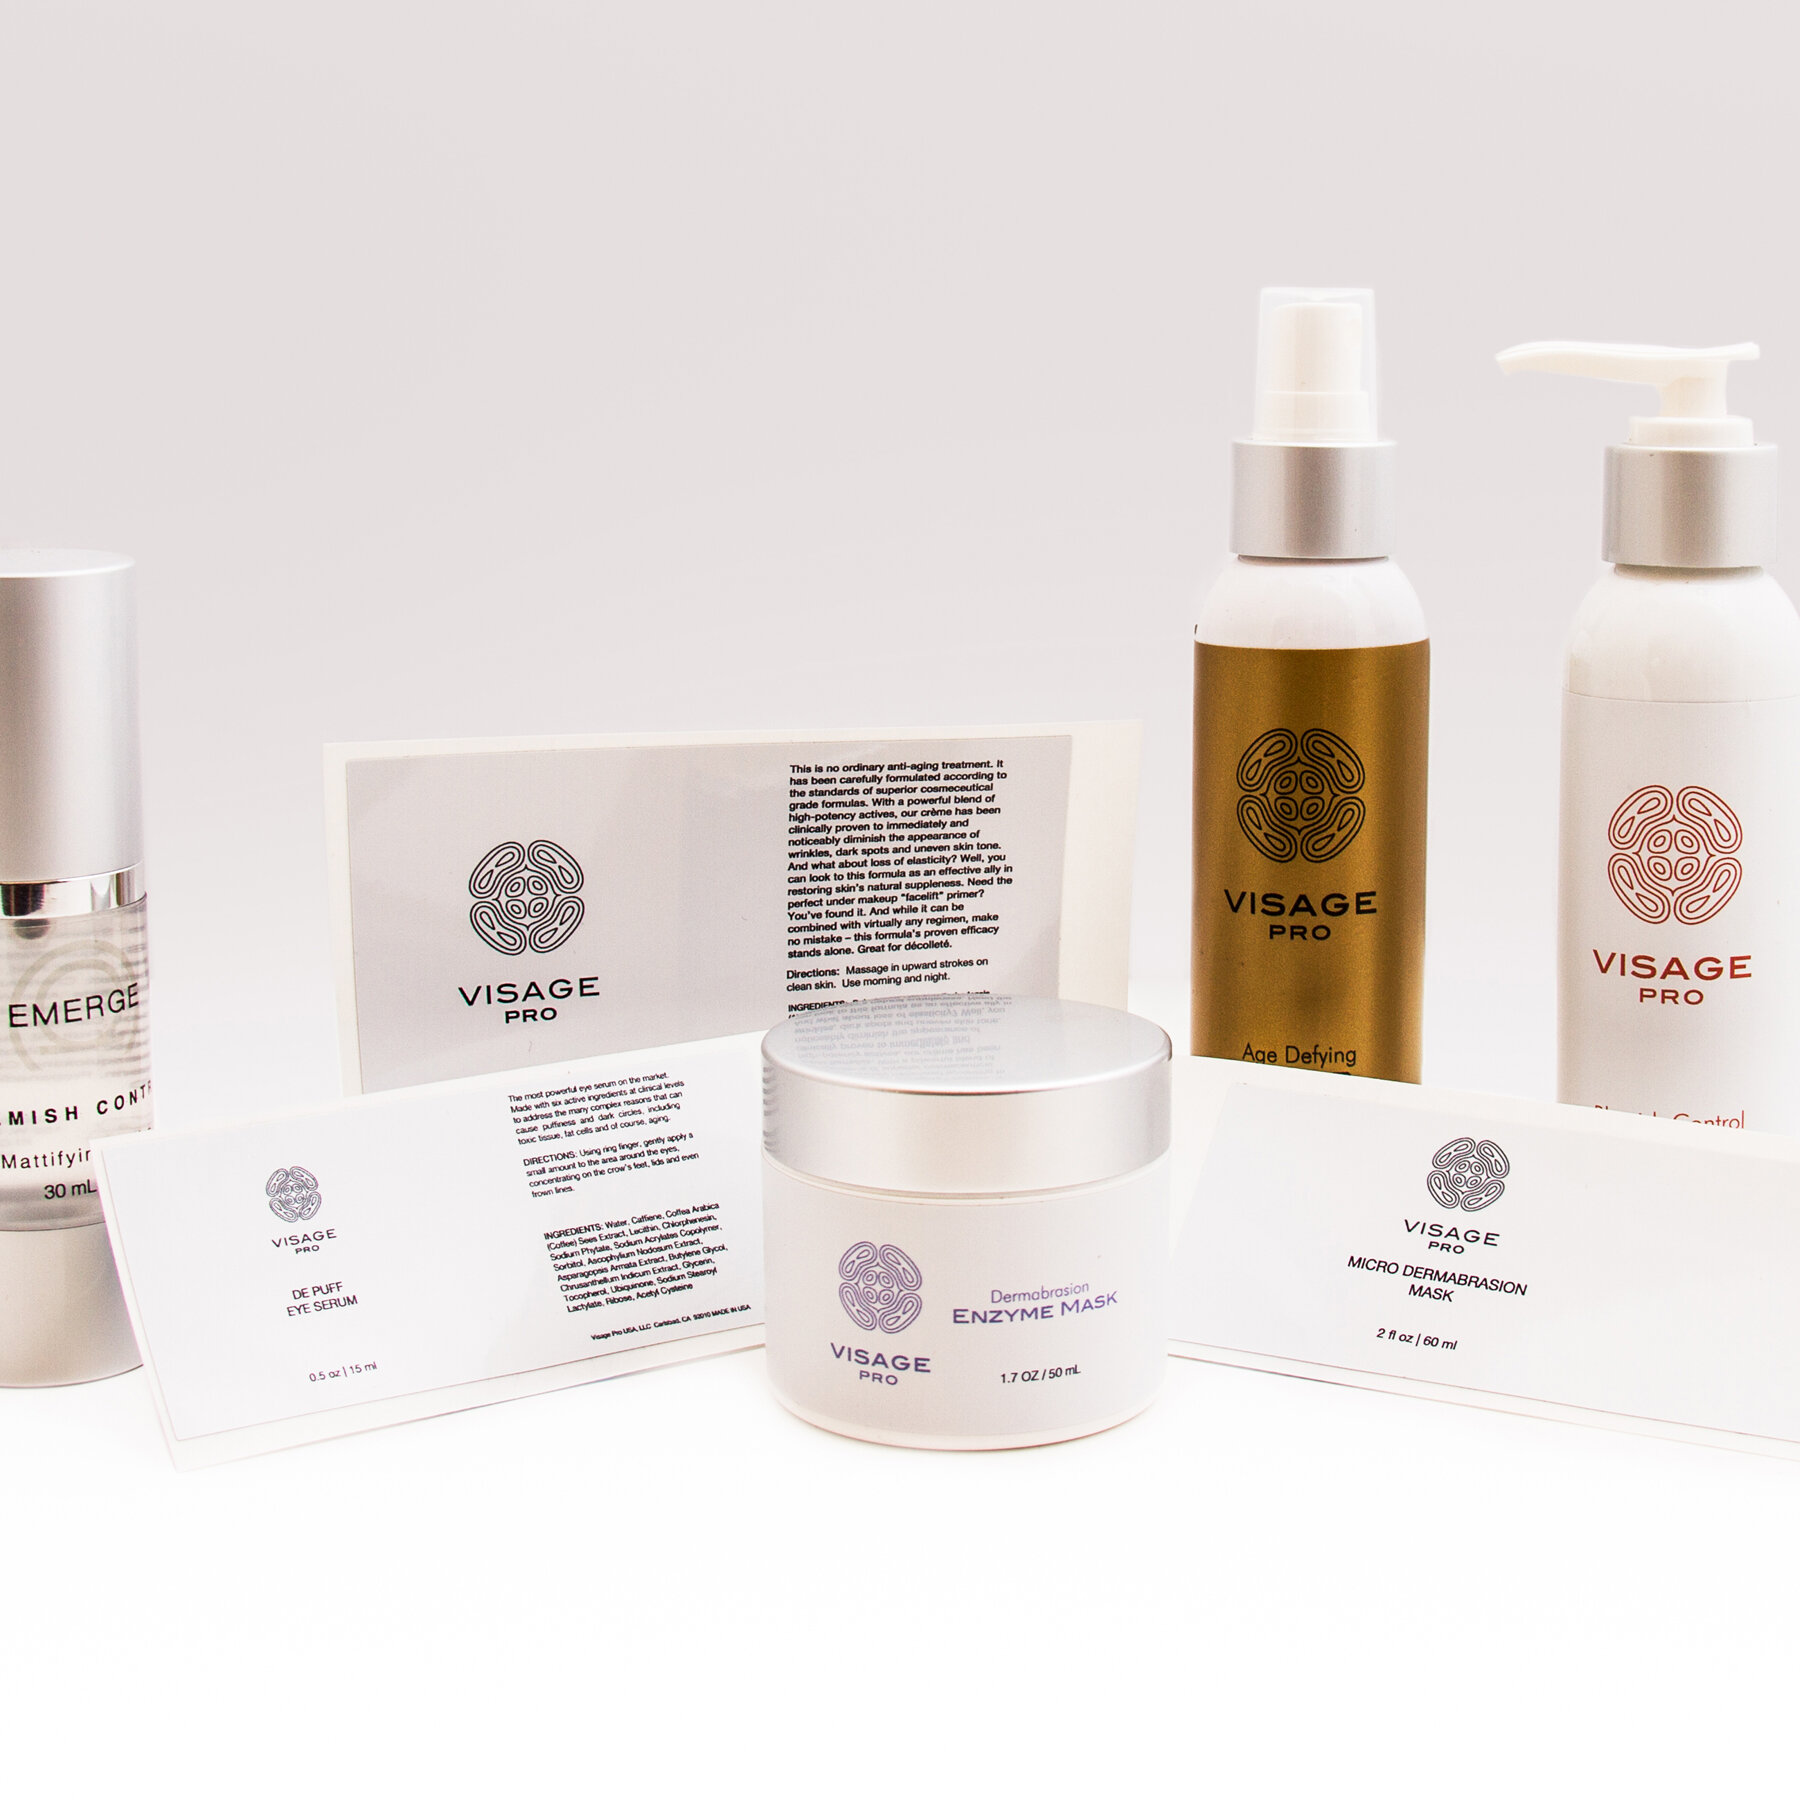 Product-Labels-SRLPL-private-labels-cosmeceuticals.jpg